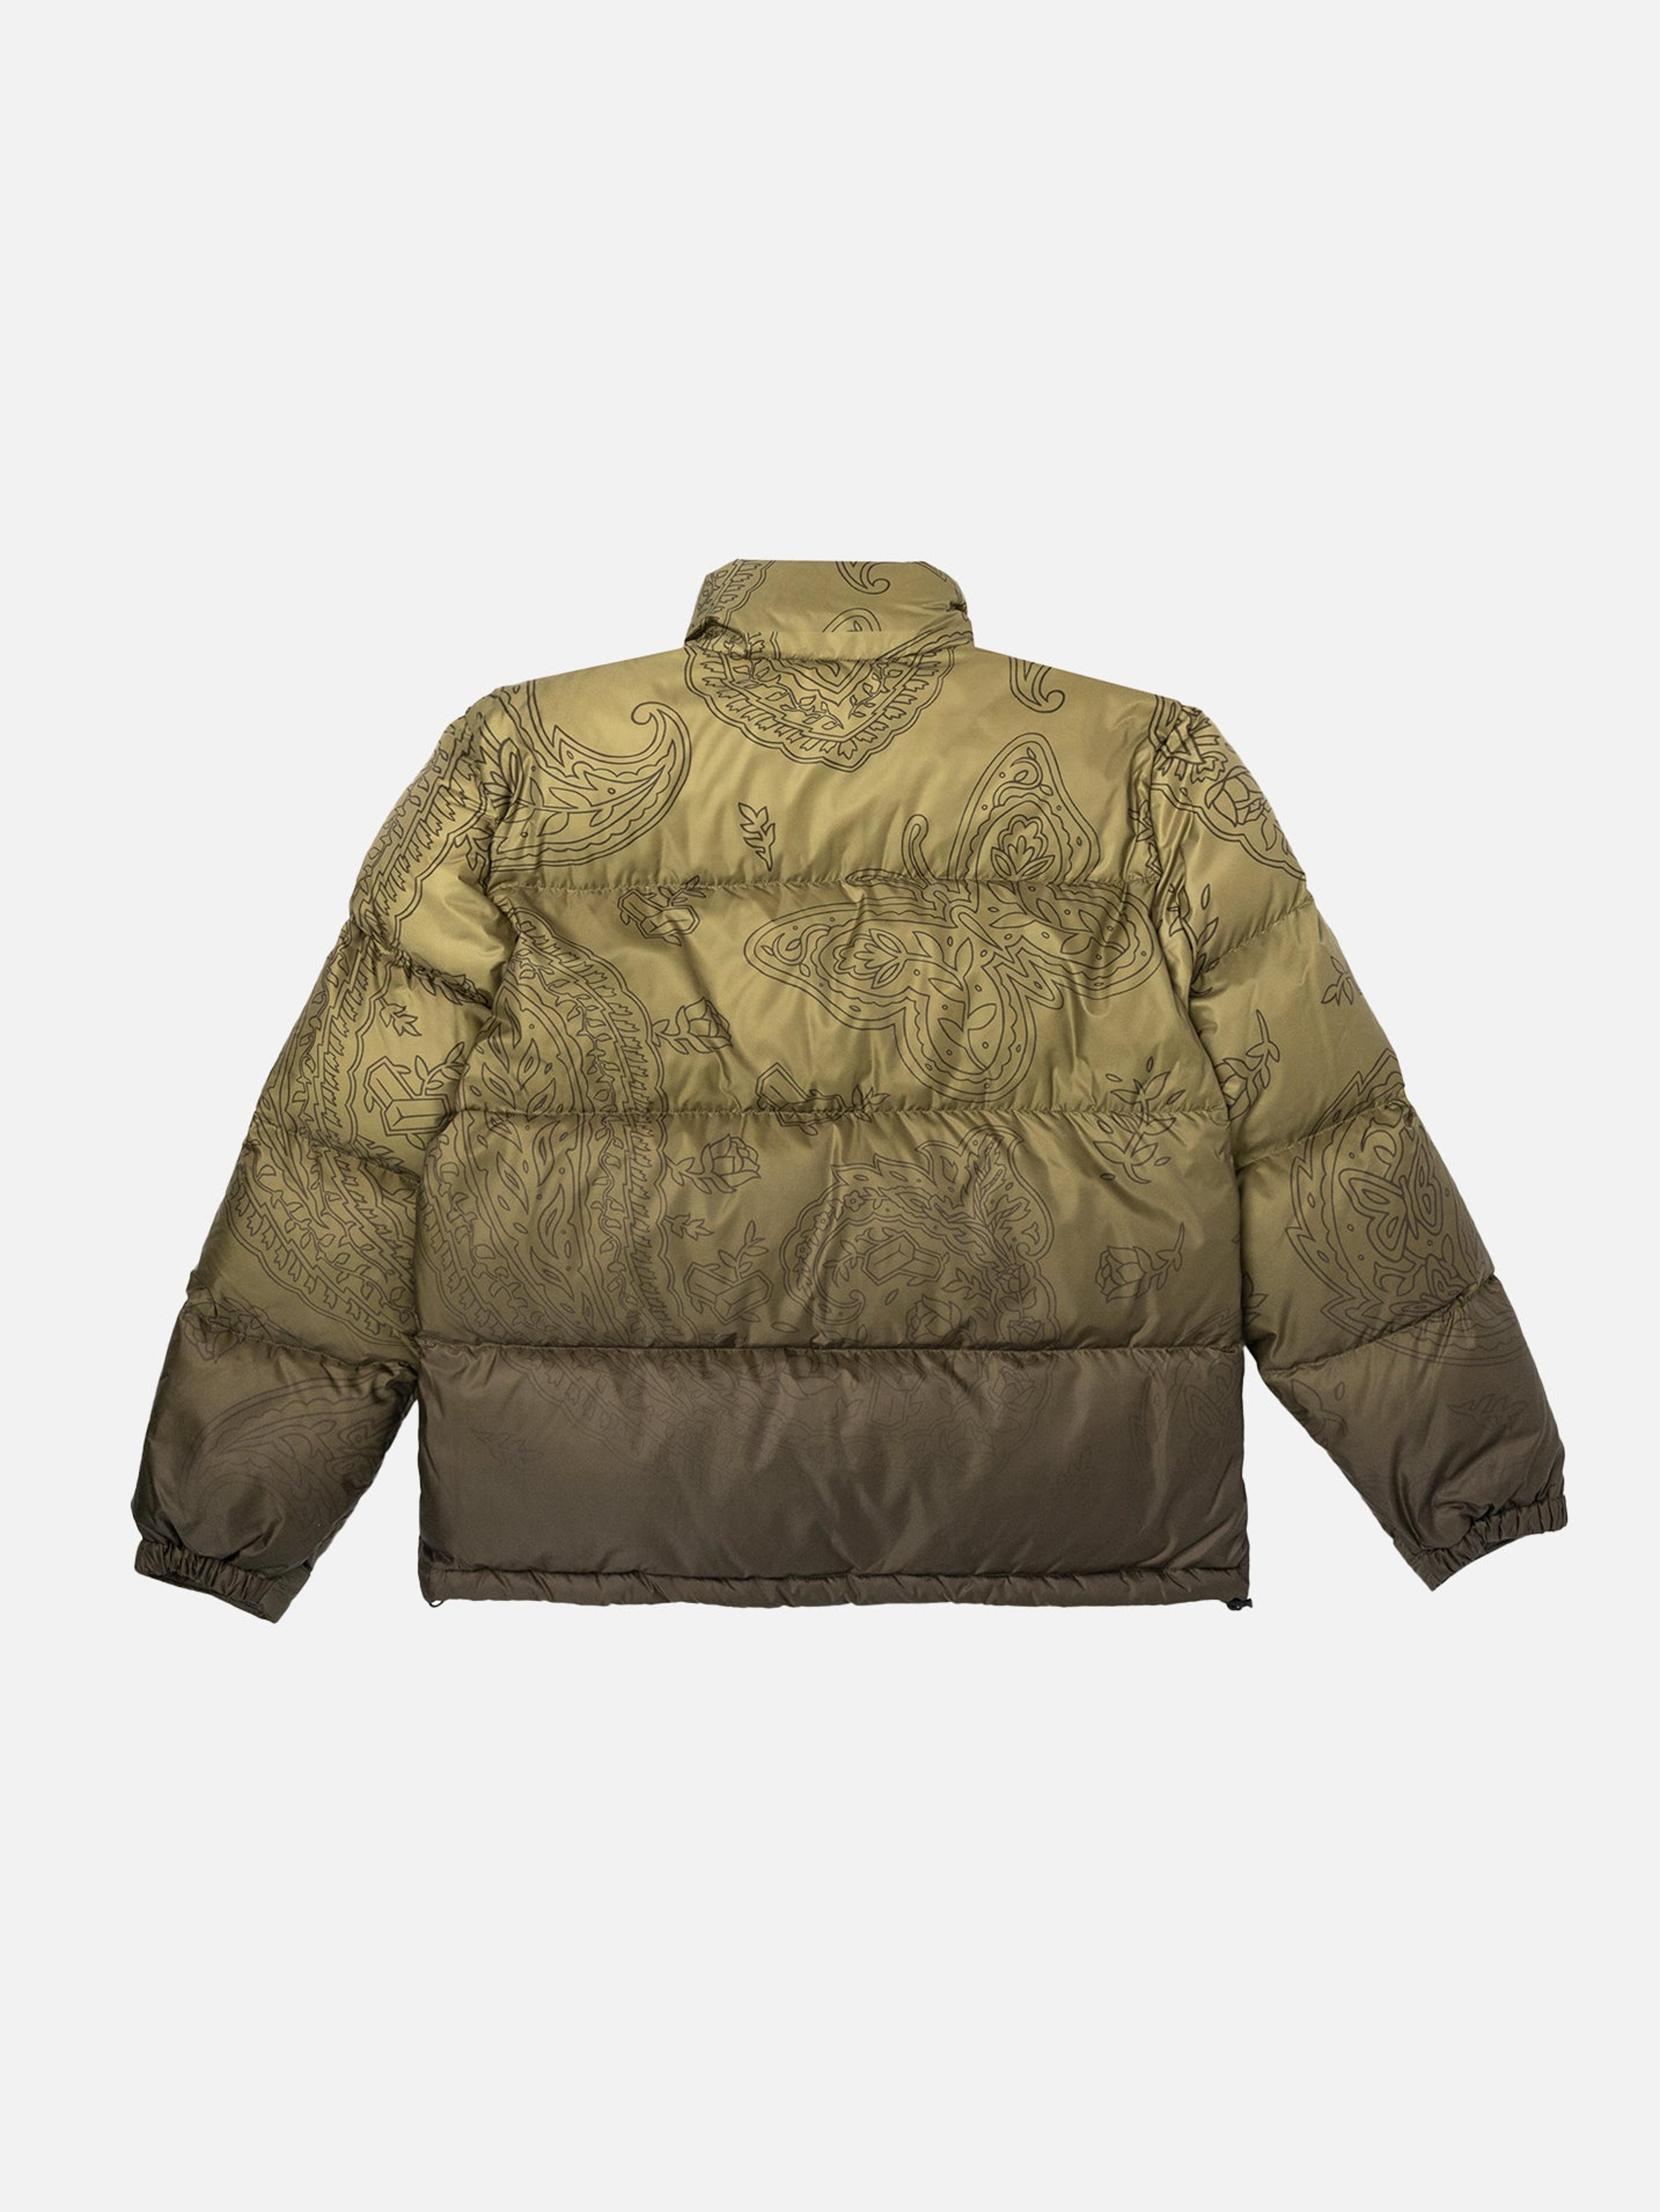 Alternate View 3 of Paisley Butterfly Down Jacket - Olive